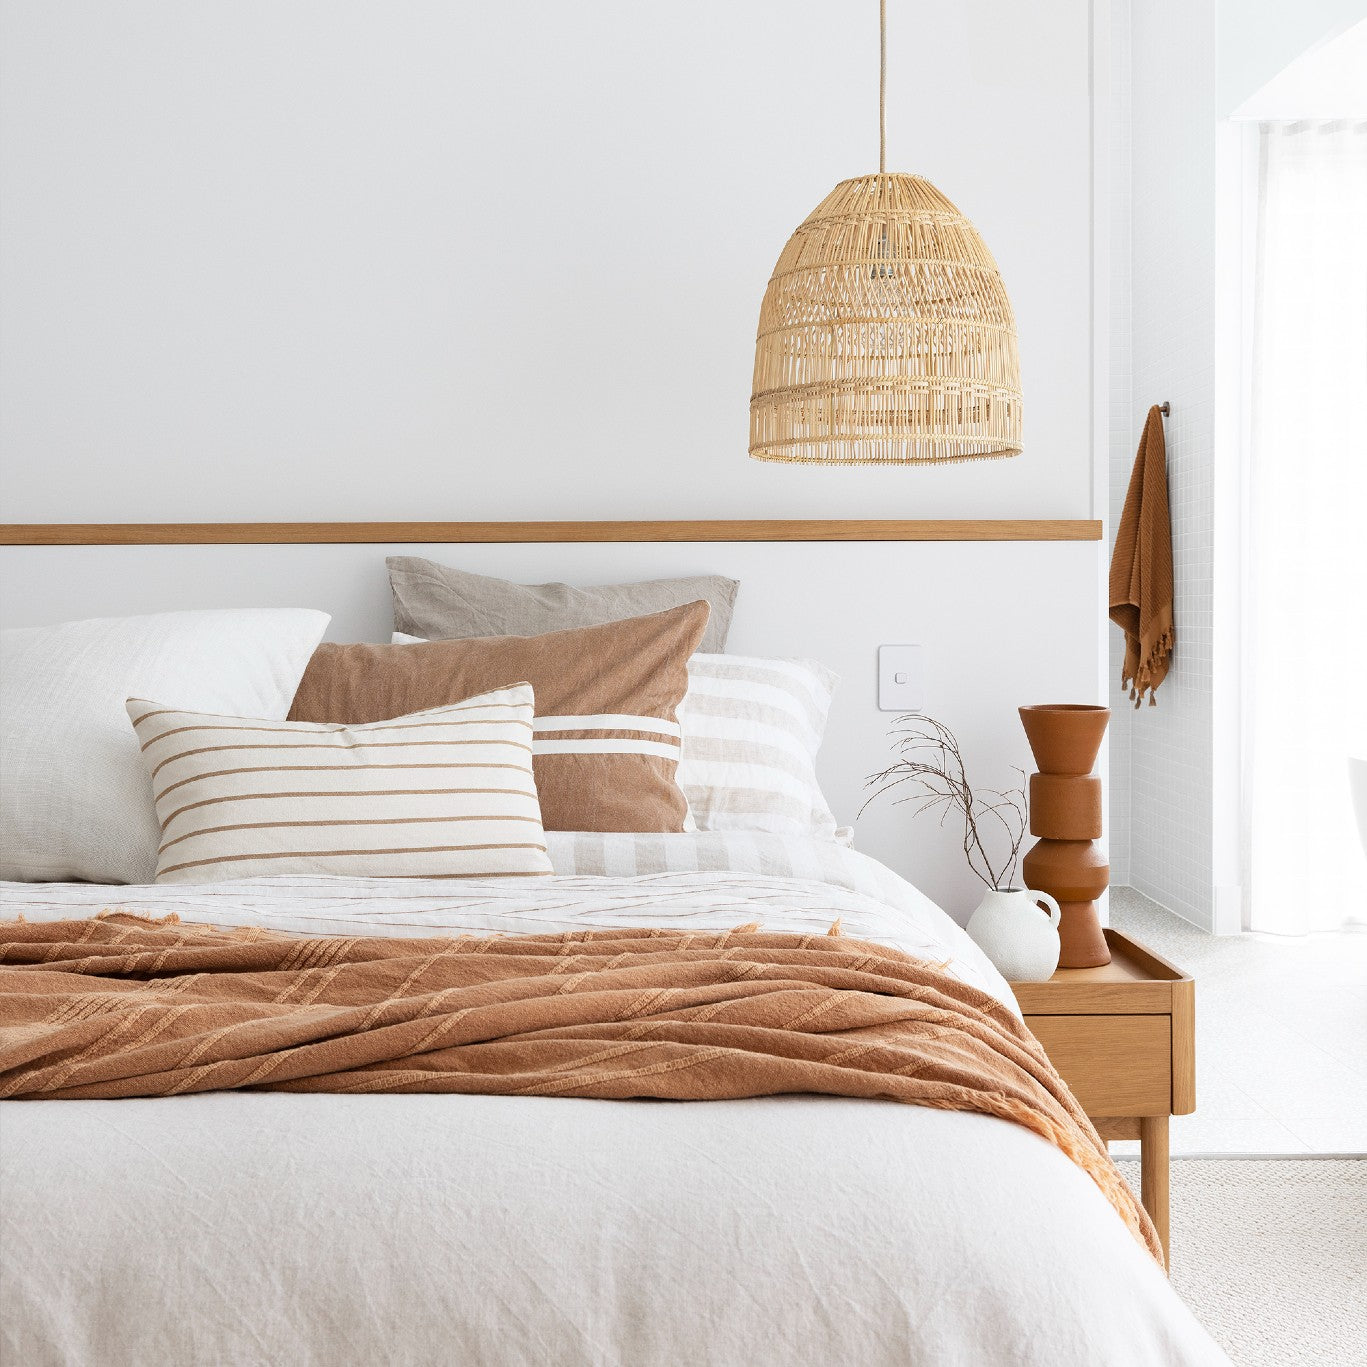 Coastal style pendant light hanging in a light filled bedroom. the bed is dressed in natural linen with a burnt orange throw and a matching towel hangs in the ensuite behind.